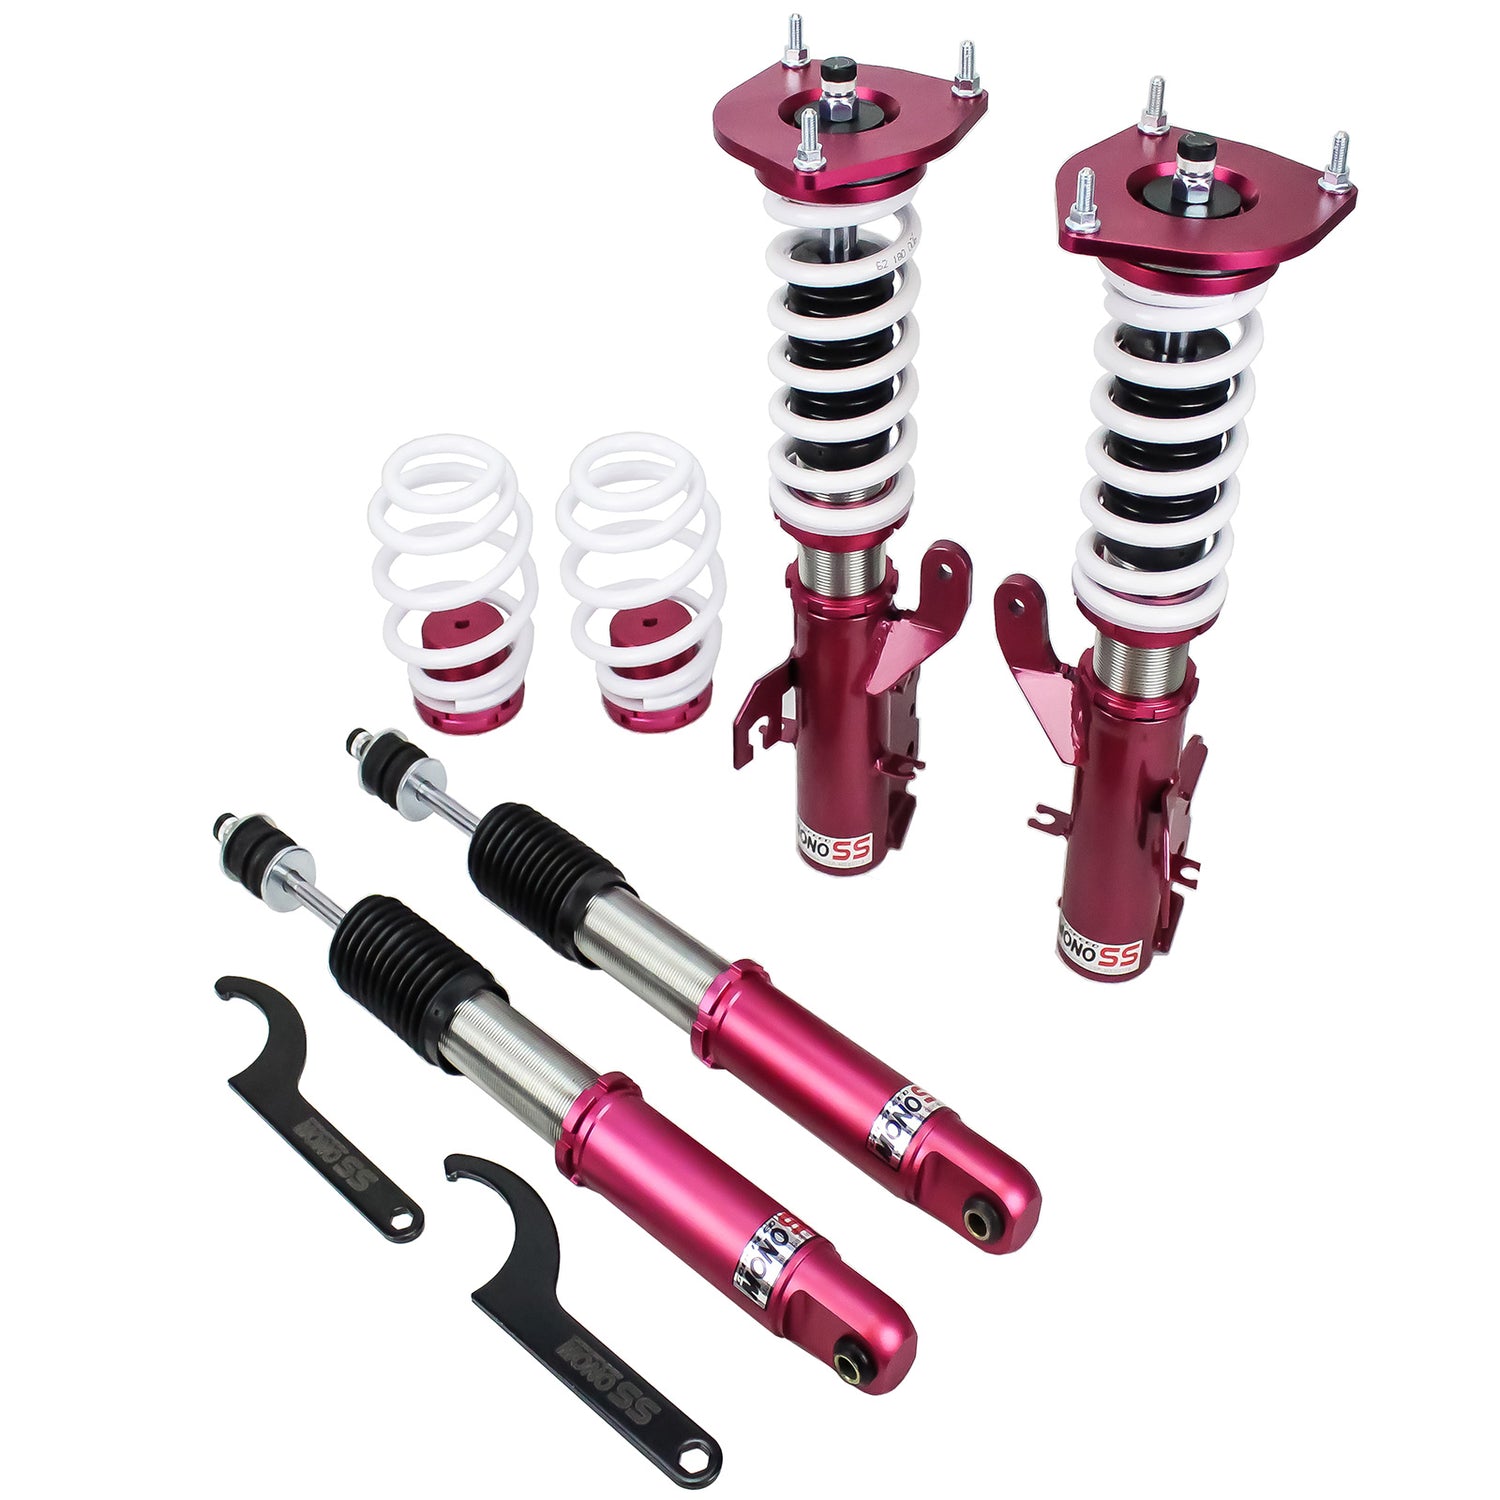 Godspeed MSS0118-B MonoSS Coilover Lowering Kit, Fully Adjustable, Ride Height, Spring Tension And 16 Click Damping, Nissan Versa Hatchback(C11) 2006-13